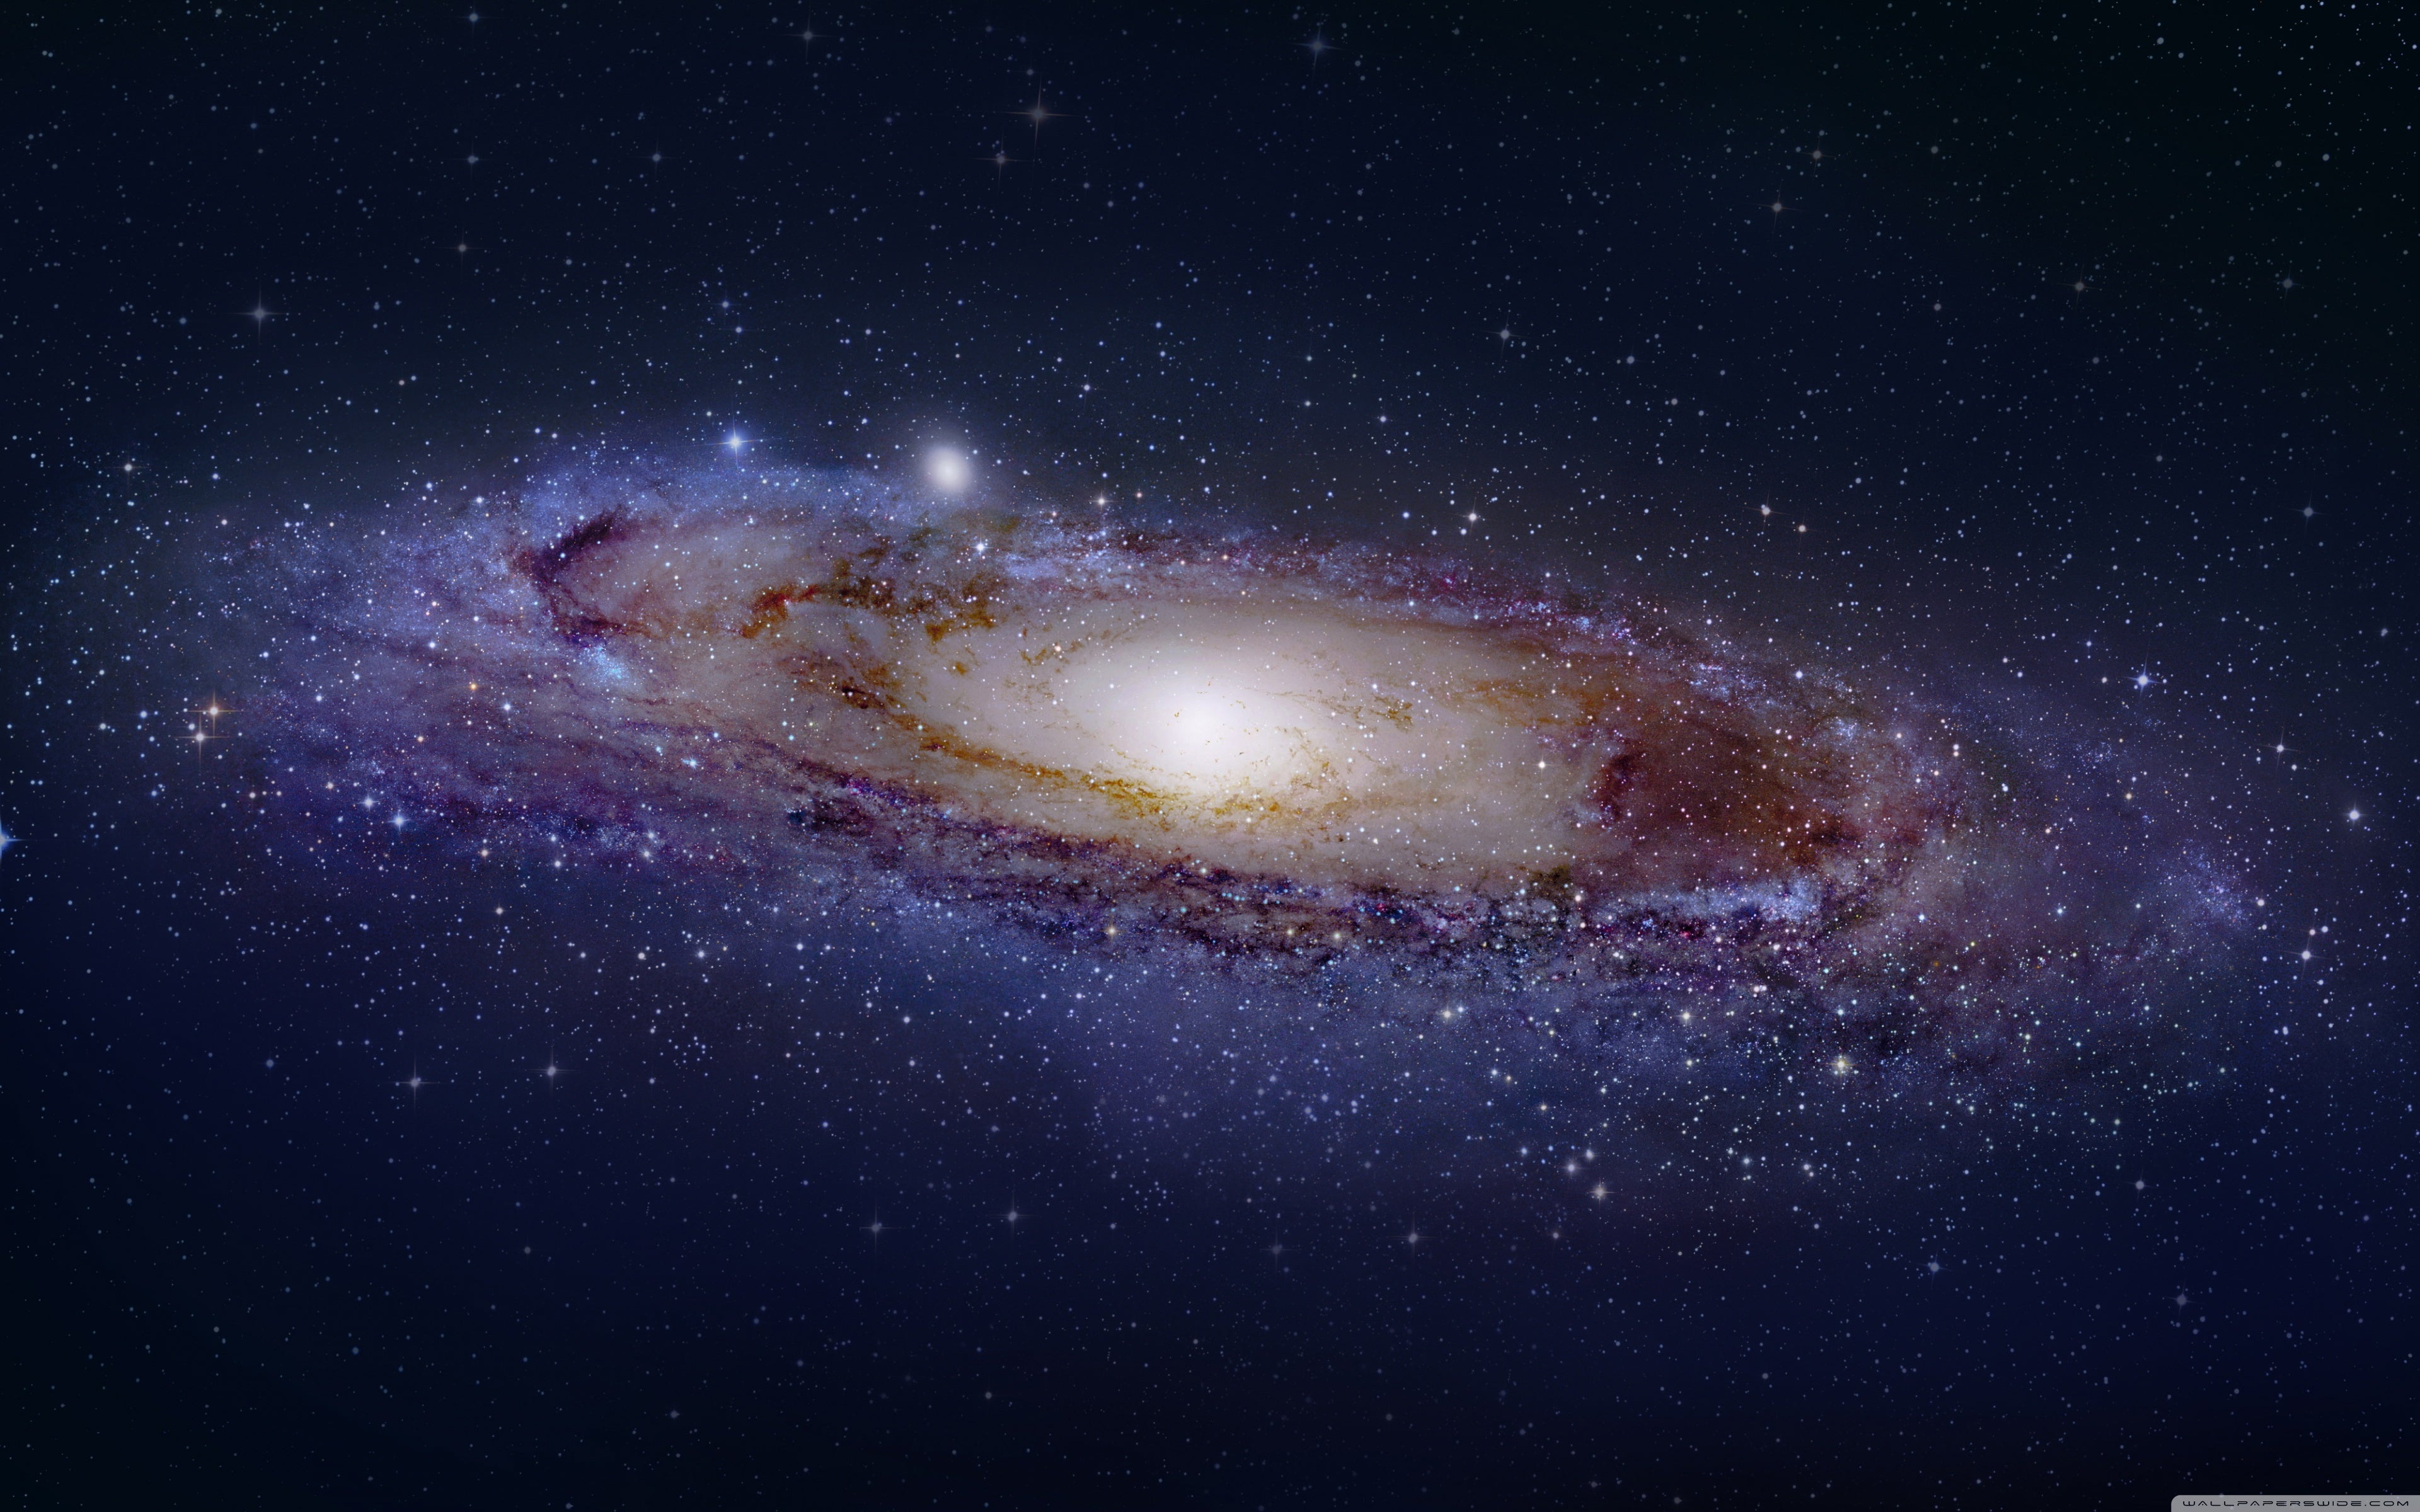 Andromeda 4K wallpaper for your desktop or mobile screen free and easy to download